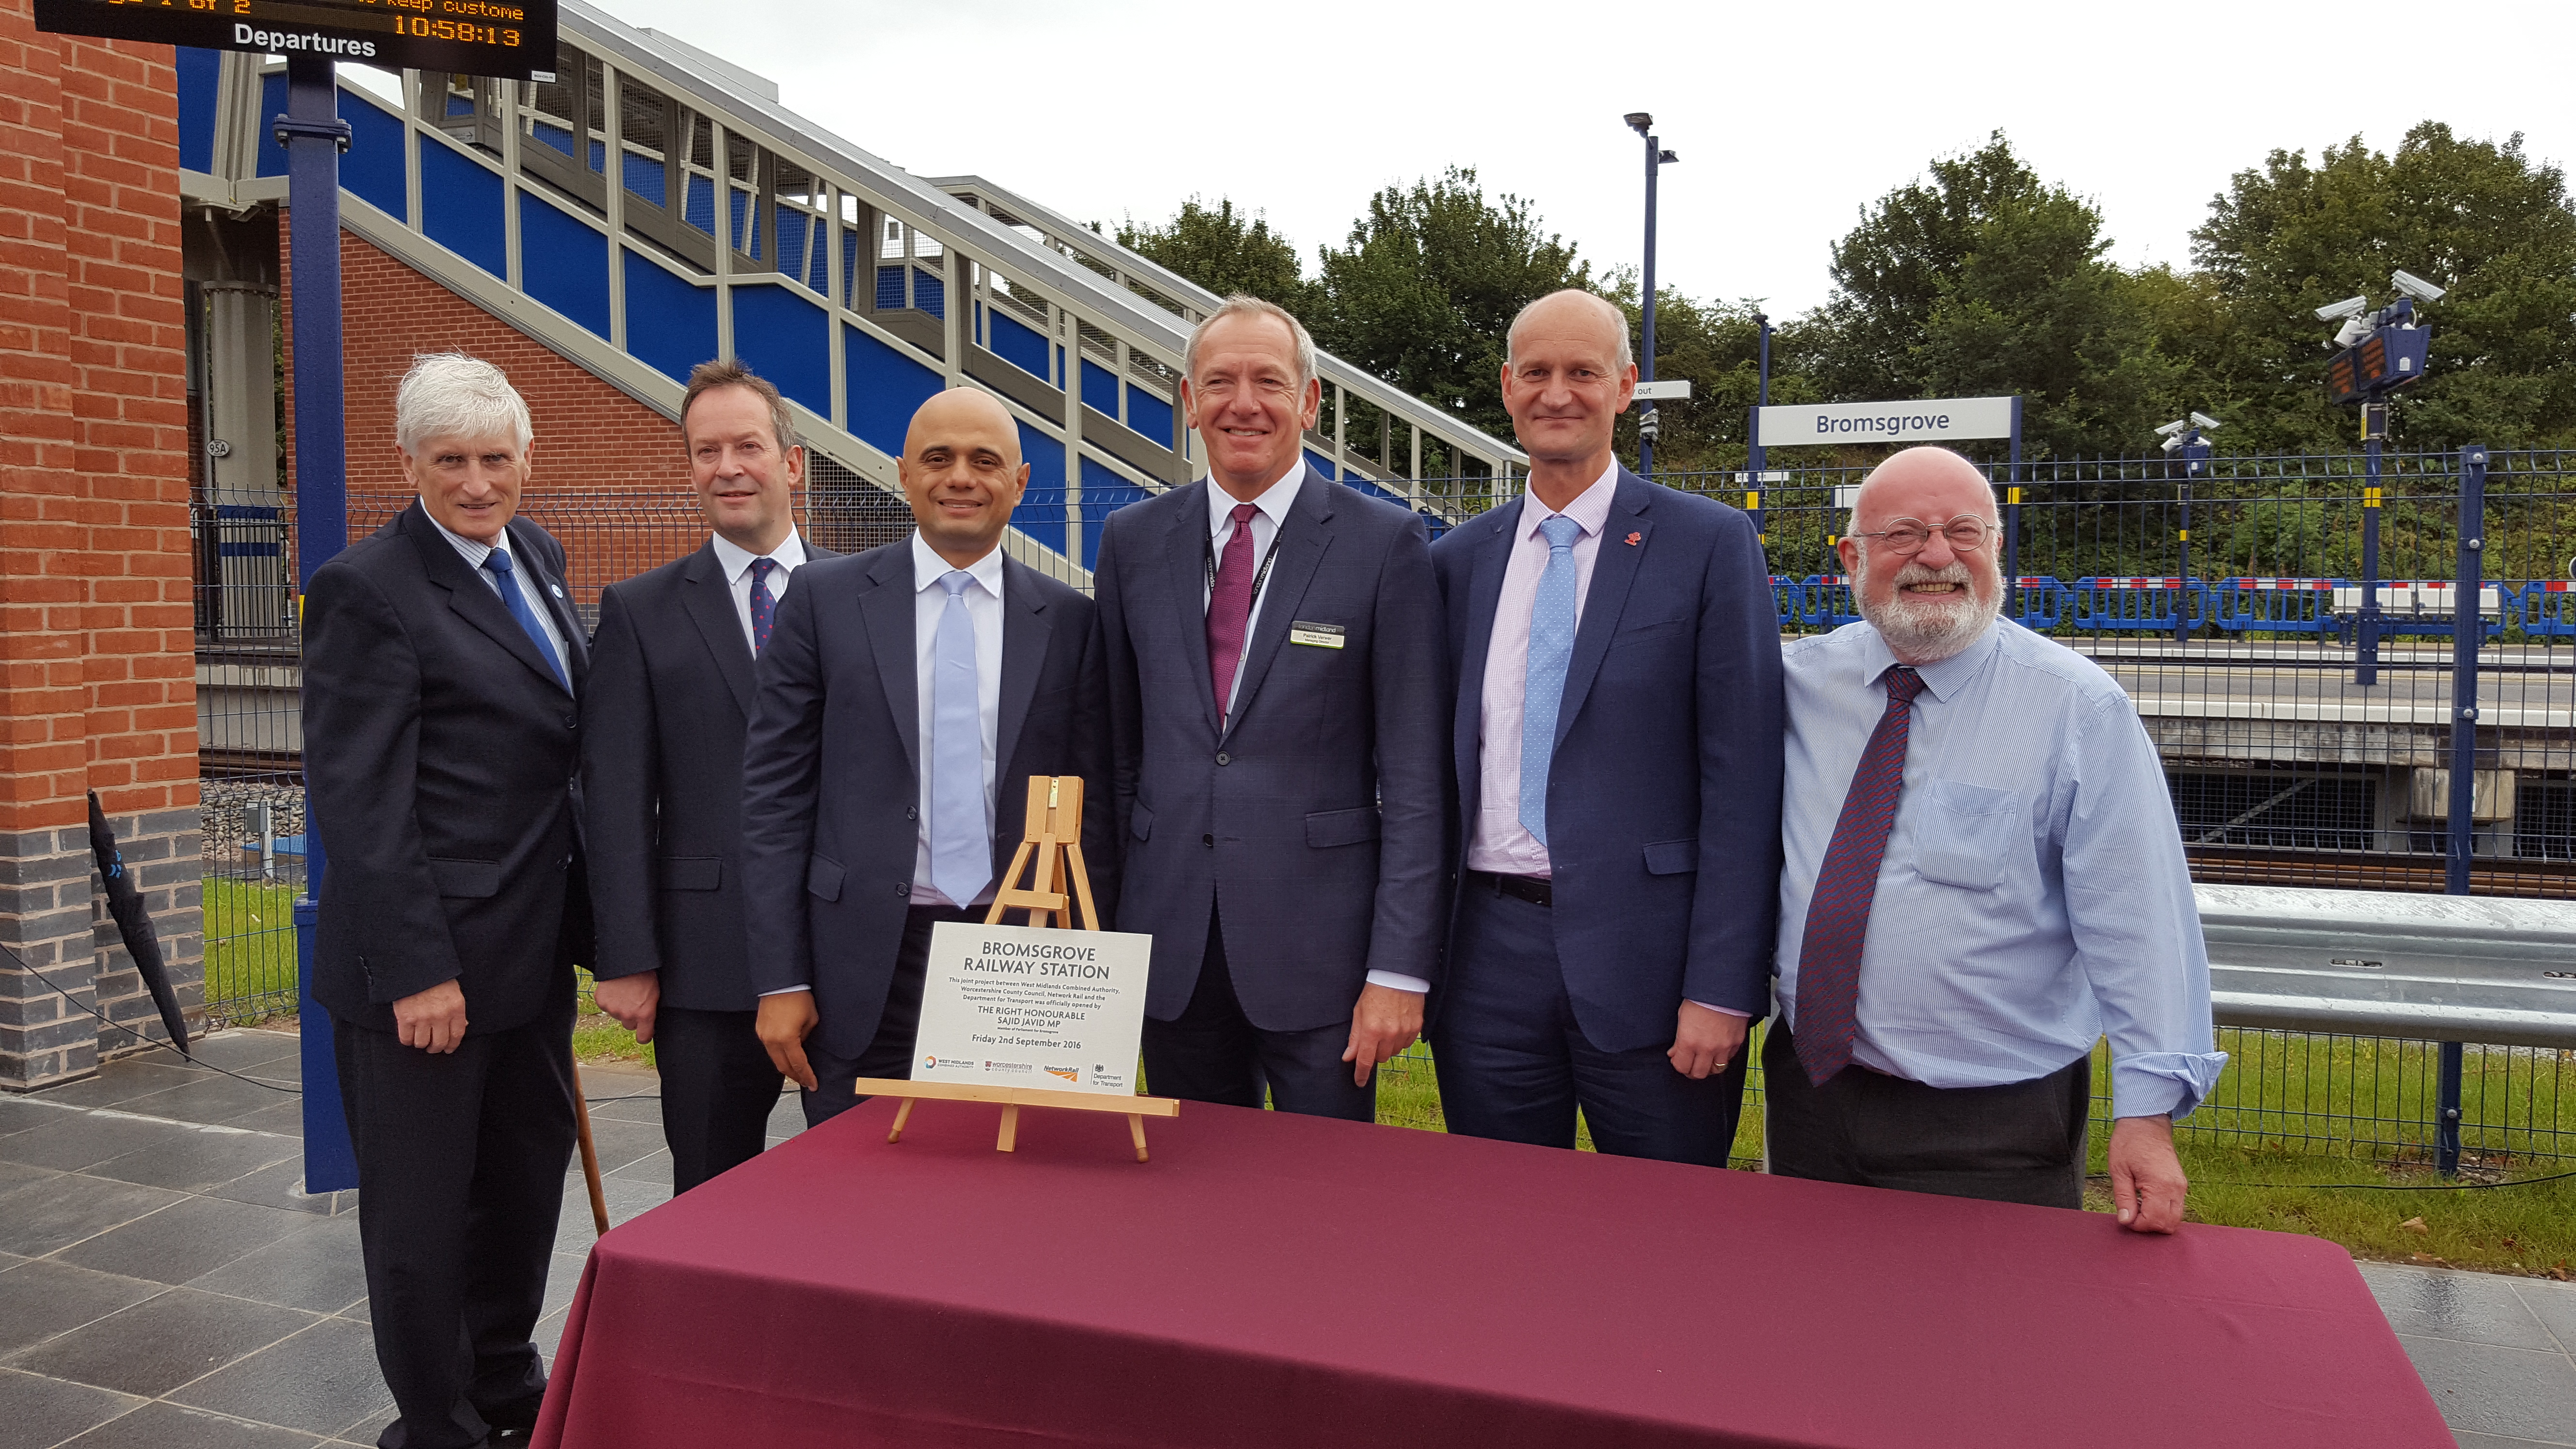 Cllr Ken Pollock, left, Richard Dugdale, Sajid Javid MP, Patrick Verwer, James Aspinall, WMCA director of corporate services, and Cllr Richard Worrall mark the official opening of Bromsgrove station.